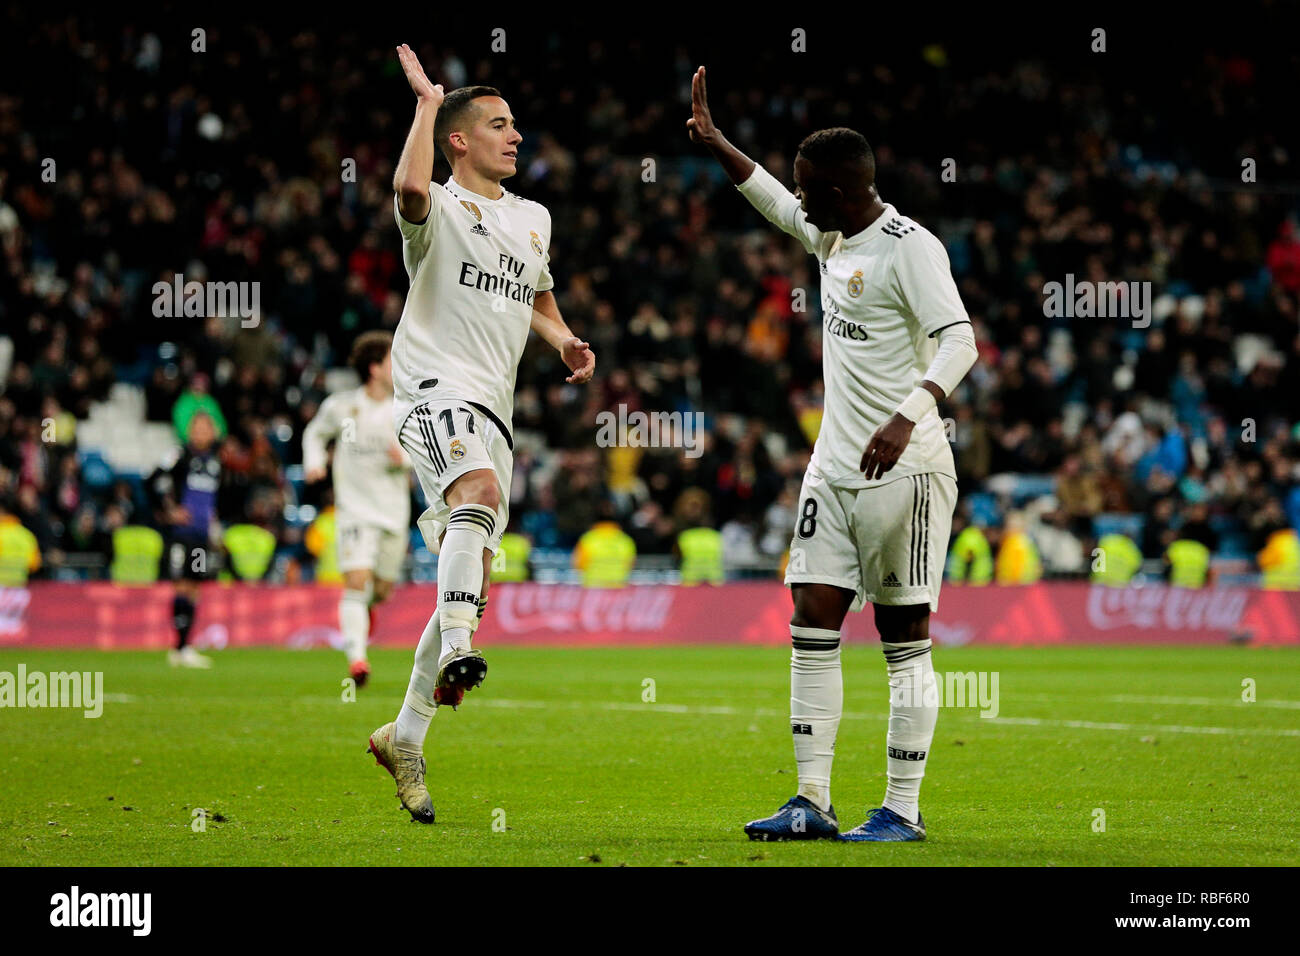 Real Madrid's Lucas Vazquez (L) and Vinicius Jr. (R) celebrate goal during Copa Del Rey match between Real Madrid and CD Leganes at Santiago Bernabeu Stadium in Madrid, Spain. January 09, 2019. Final Score: Real Madrid 3 - CD Leganes 0 Stock Photo